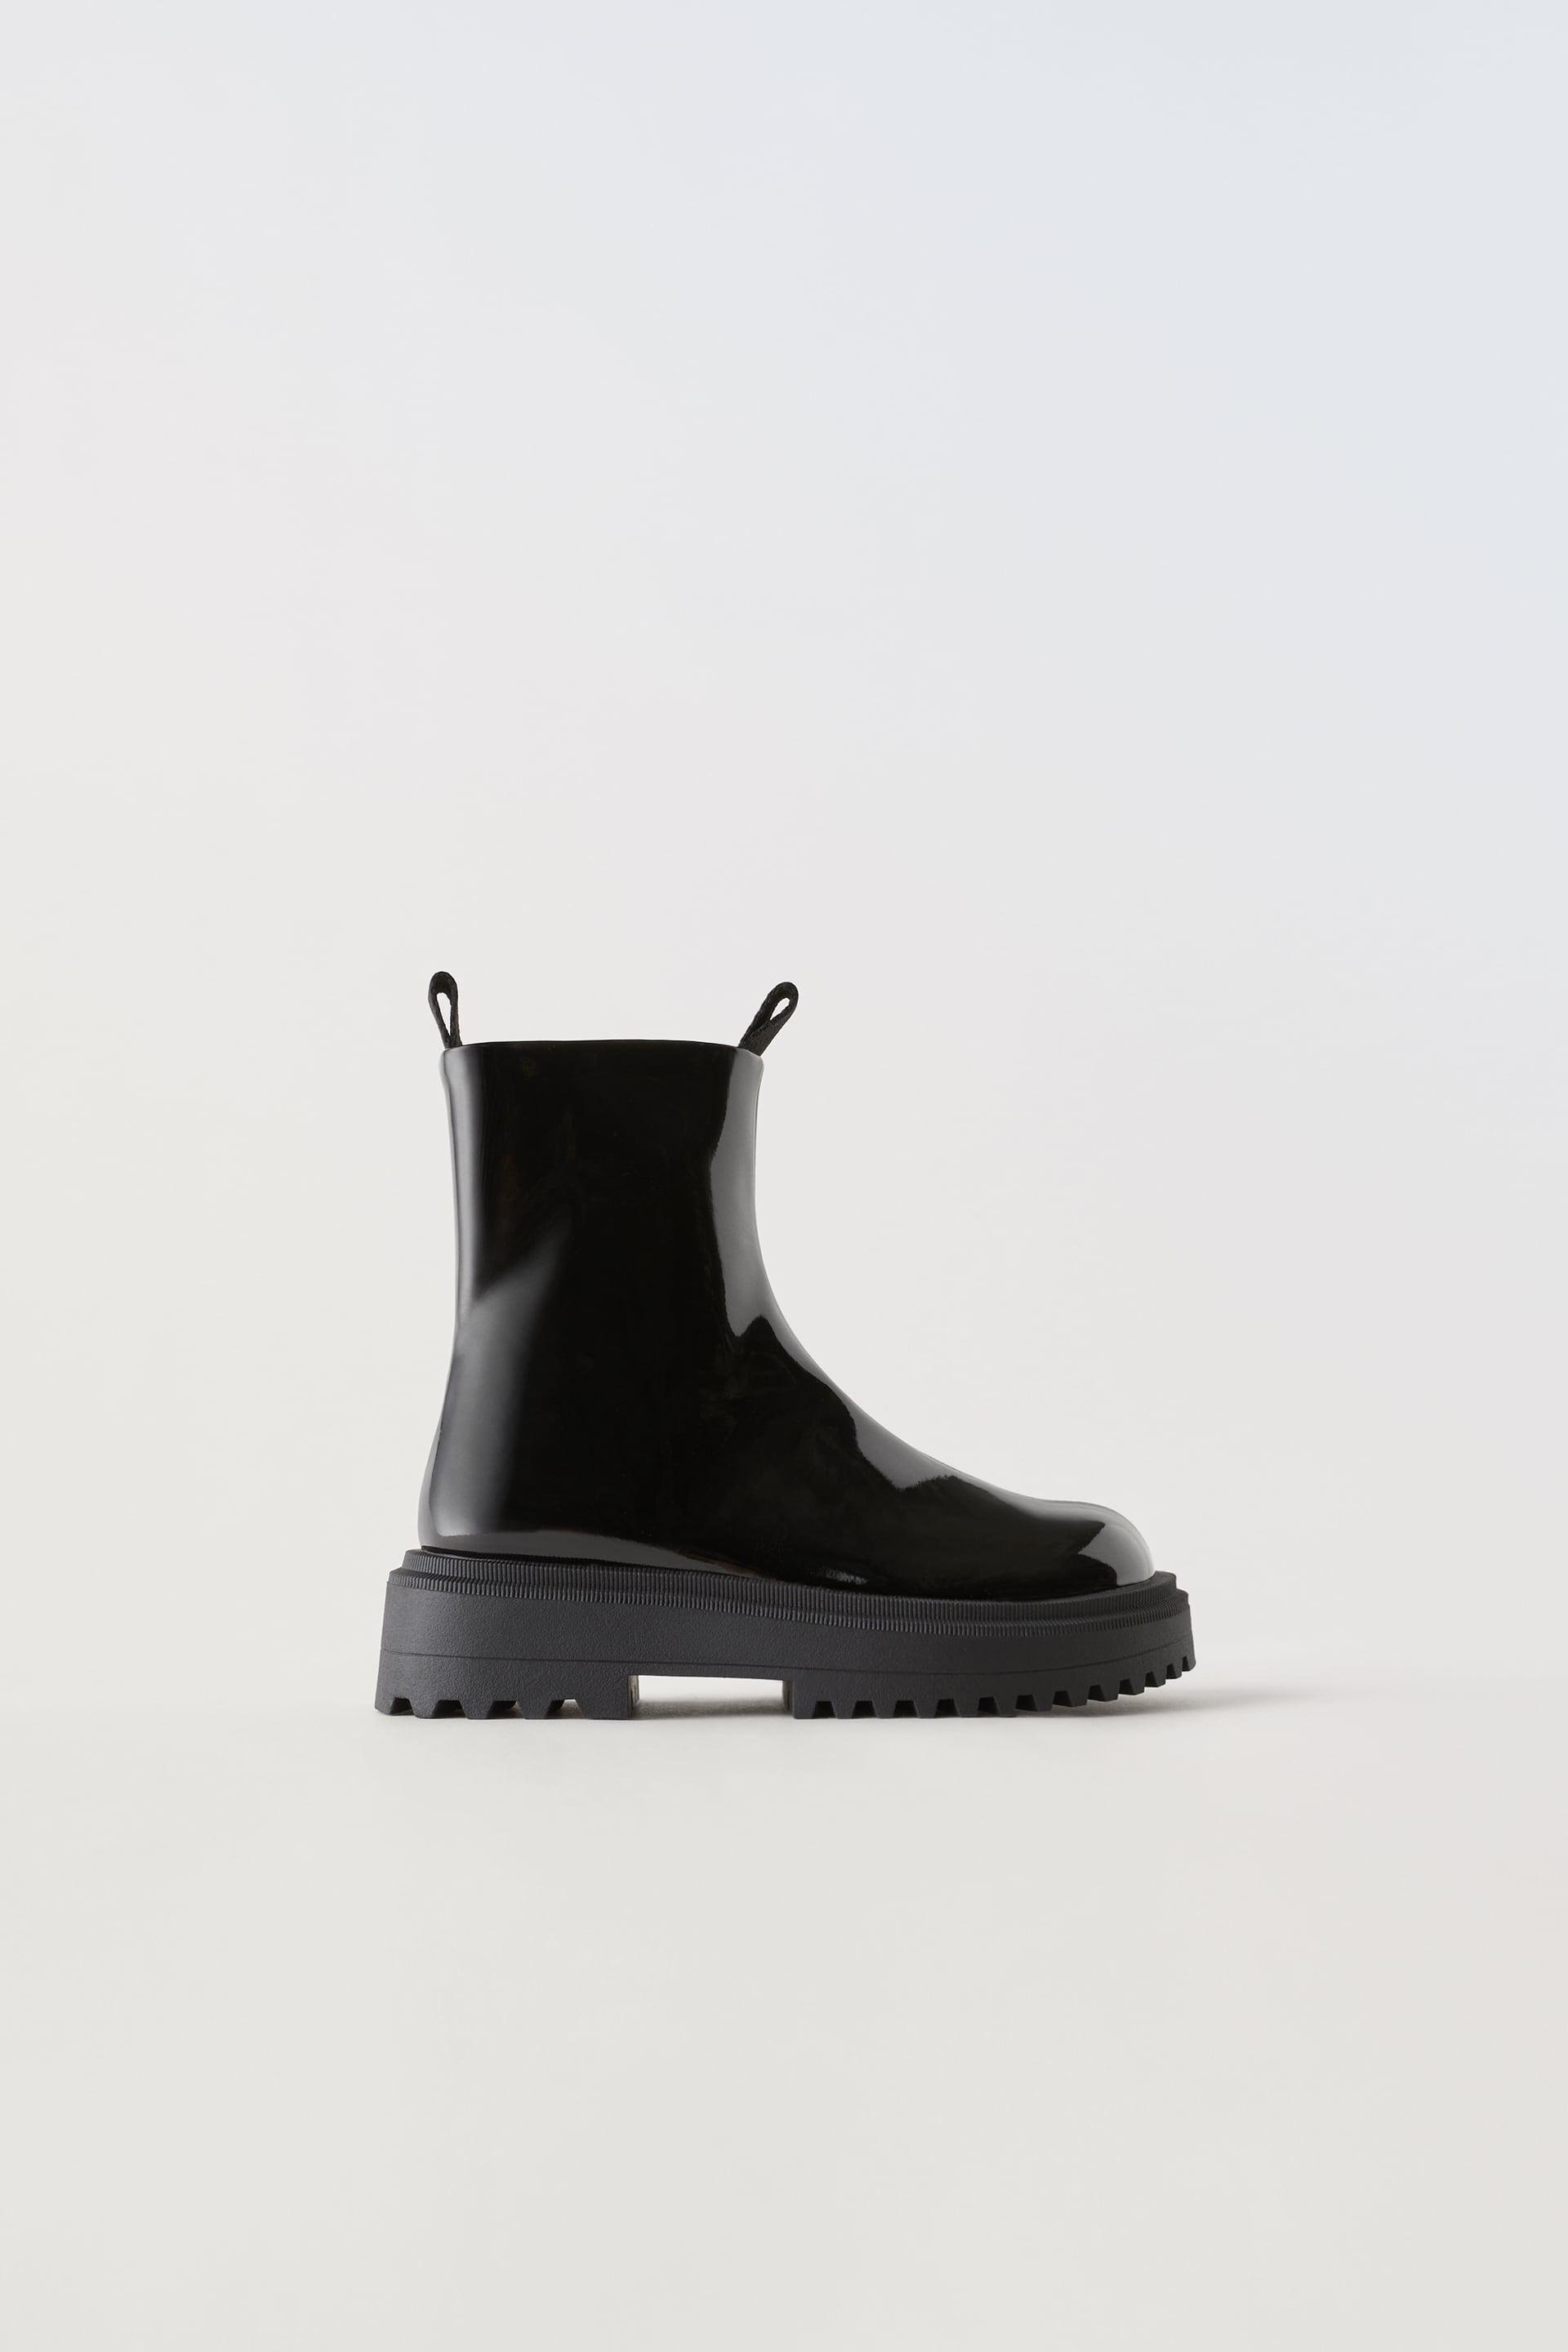 FAUX PATENT LEATHER STRETCH ANKLE BOOTS by ZARA